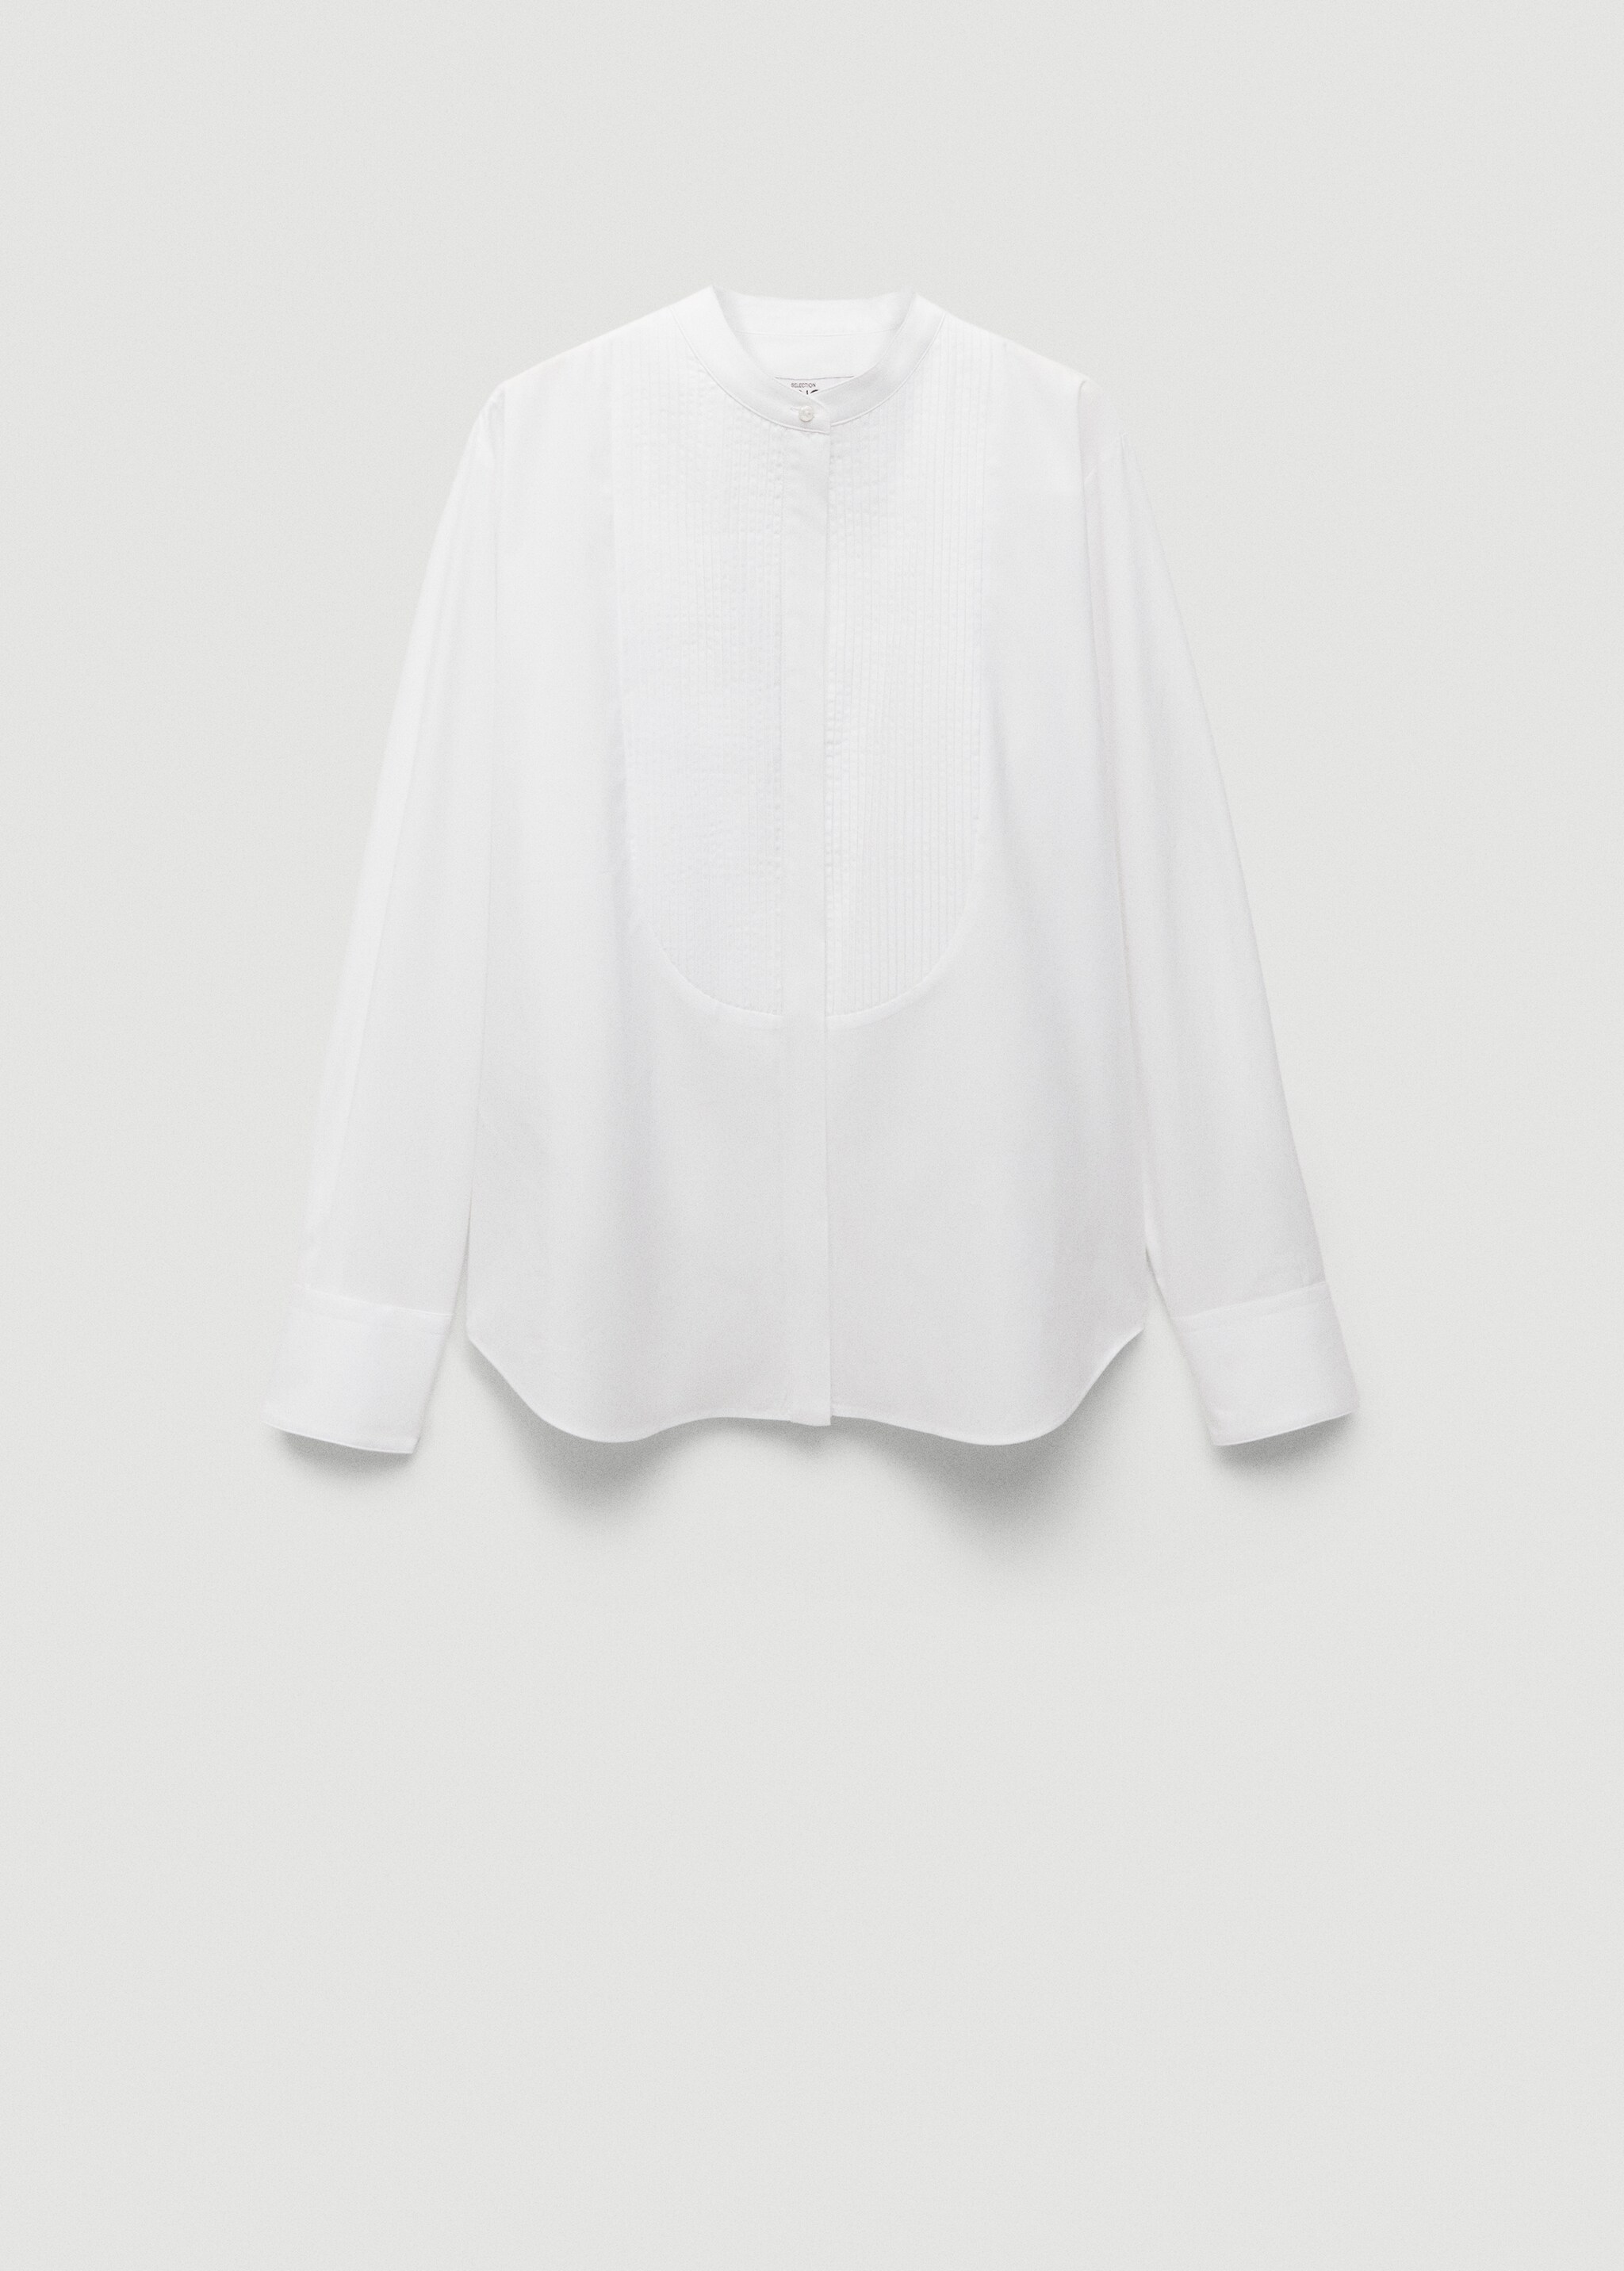 Pleated panel shirt - Article without model